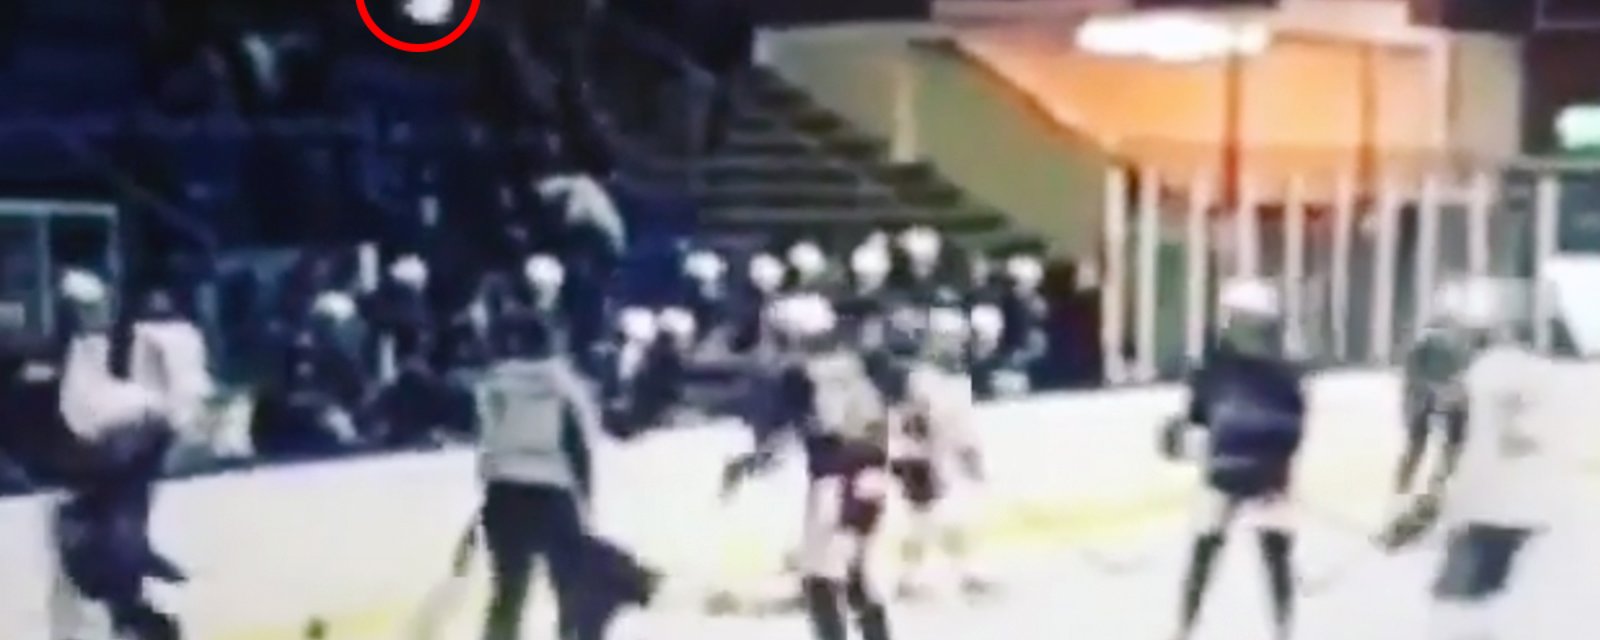 European league player nearly takes off opponent's head with brutal uppercut